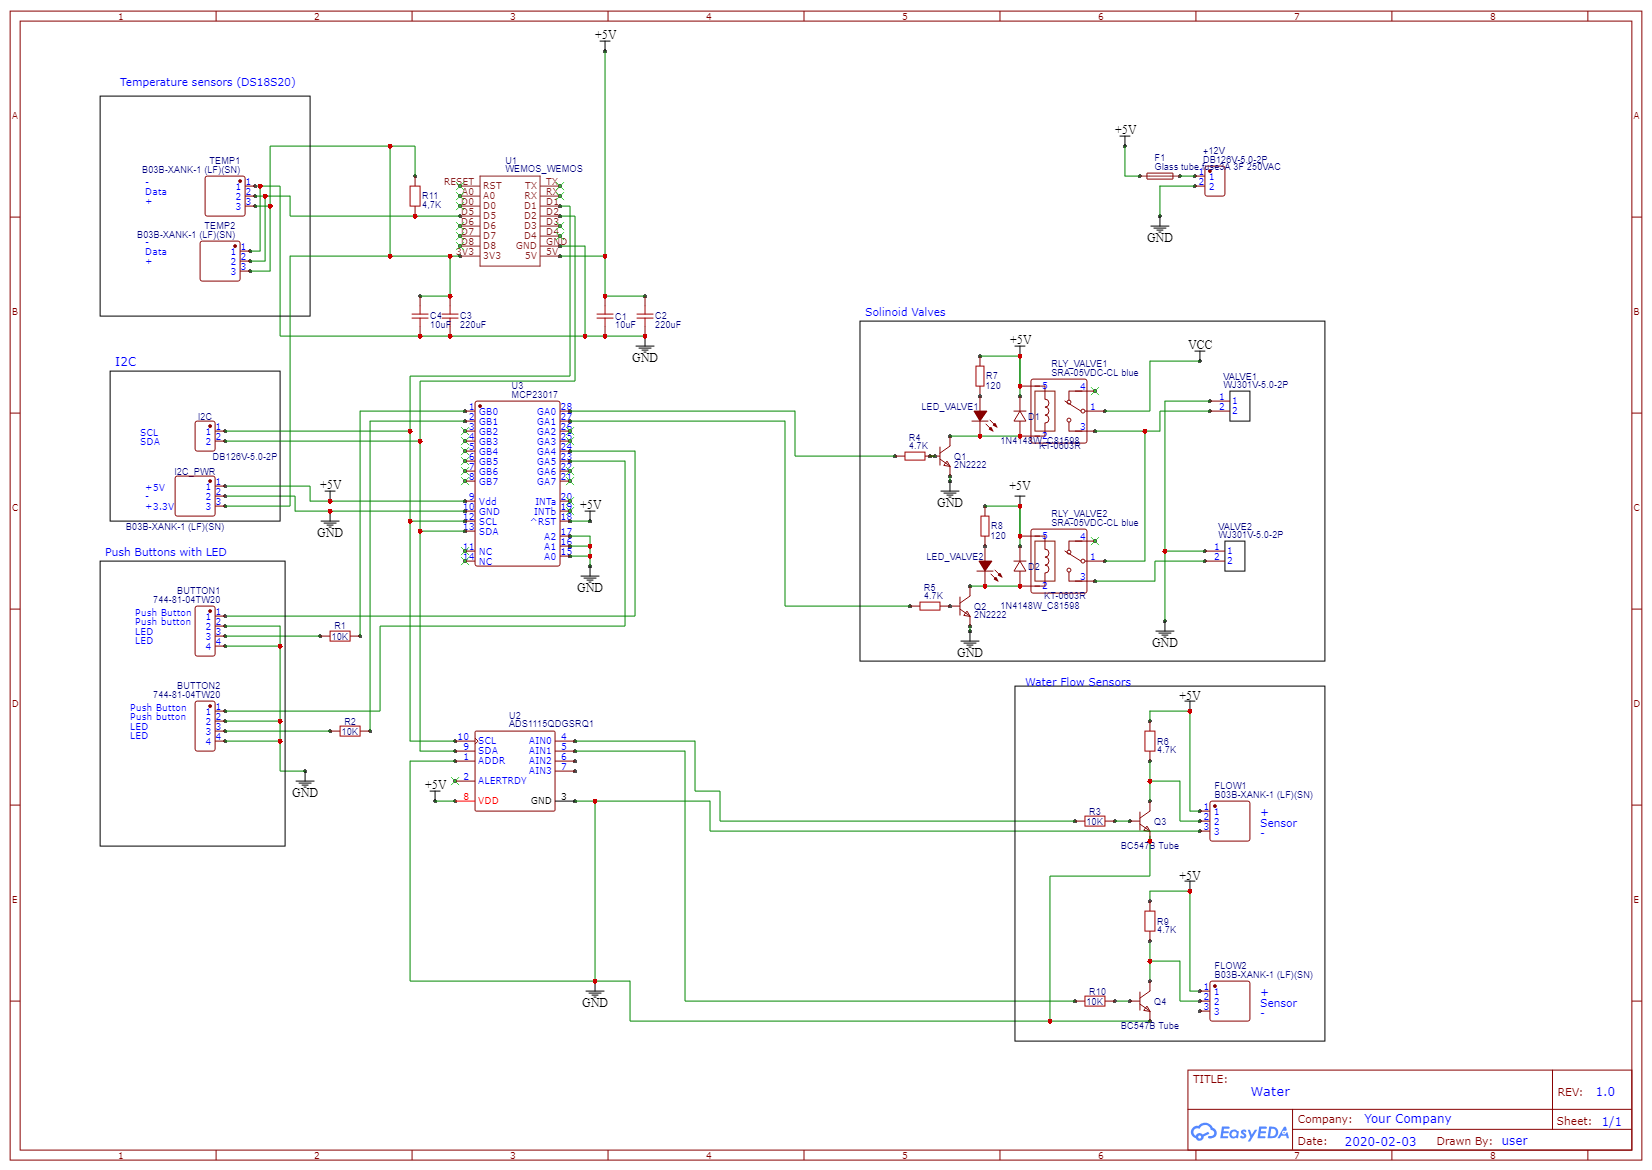 Schematic_water_Sheet_1_20200224200727.png